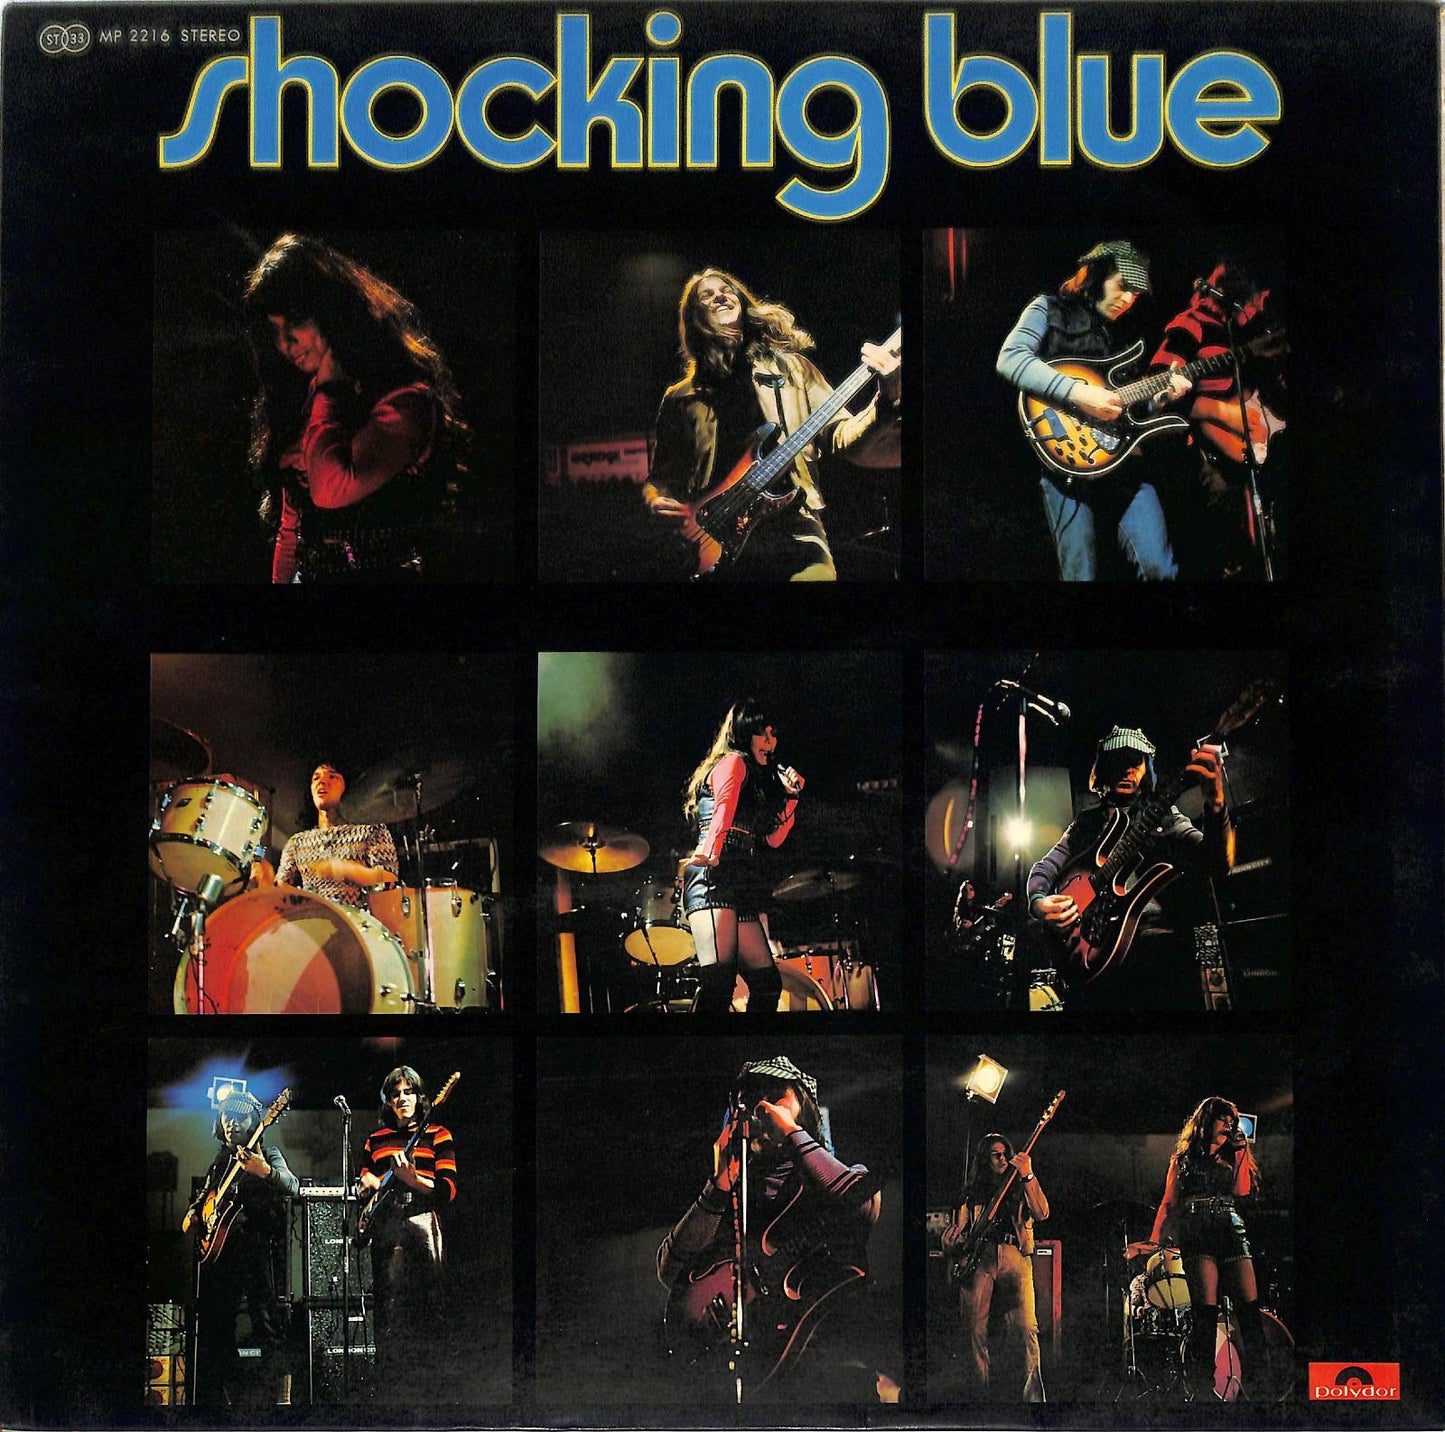 "Blossom Lady" by Shocking Blue features the band's characteristic blend of psychedelic rock and pop. Known for their hit "Venus," this track continues the group's tradition of catchy melodies and rich, vibrant instrumentation. Mariska Veres' distinctive, powerful vocals are a standout, complemented by robust guitar riffs and a driving rhythm section. "Blossom Lady" showcases Shocking Blue's talent for creating music that's both energetically upbeat and deeply rooted in the psychedelic sounds of the era.